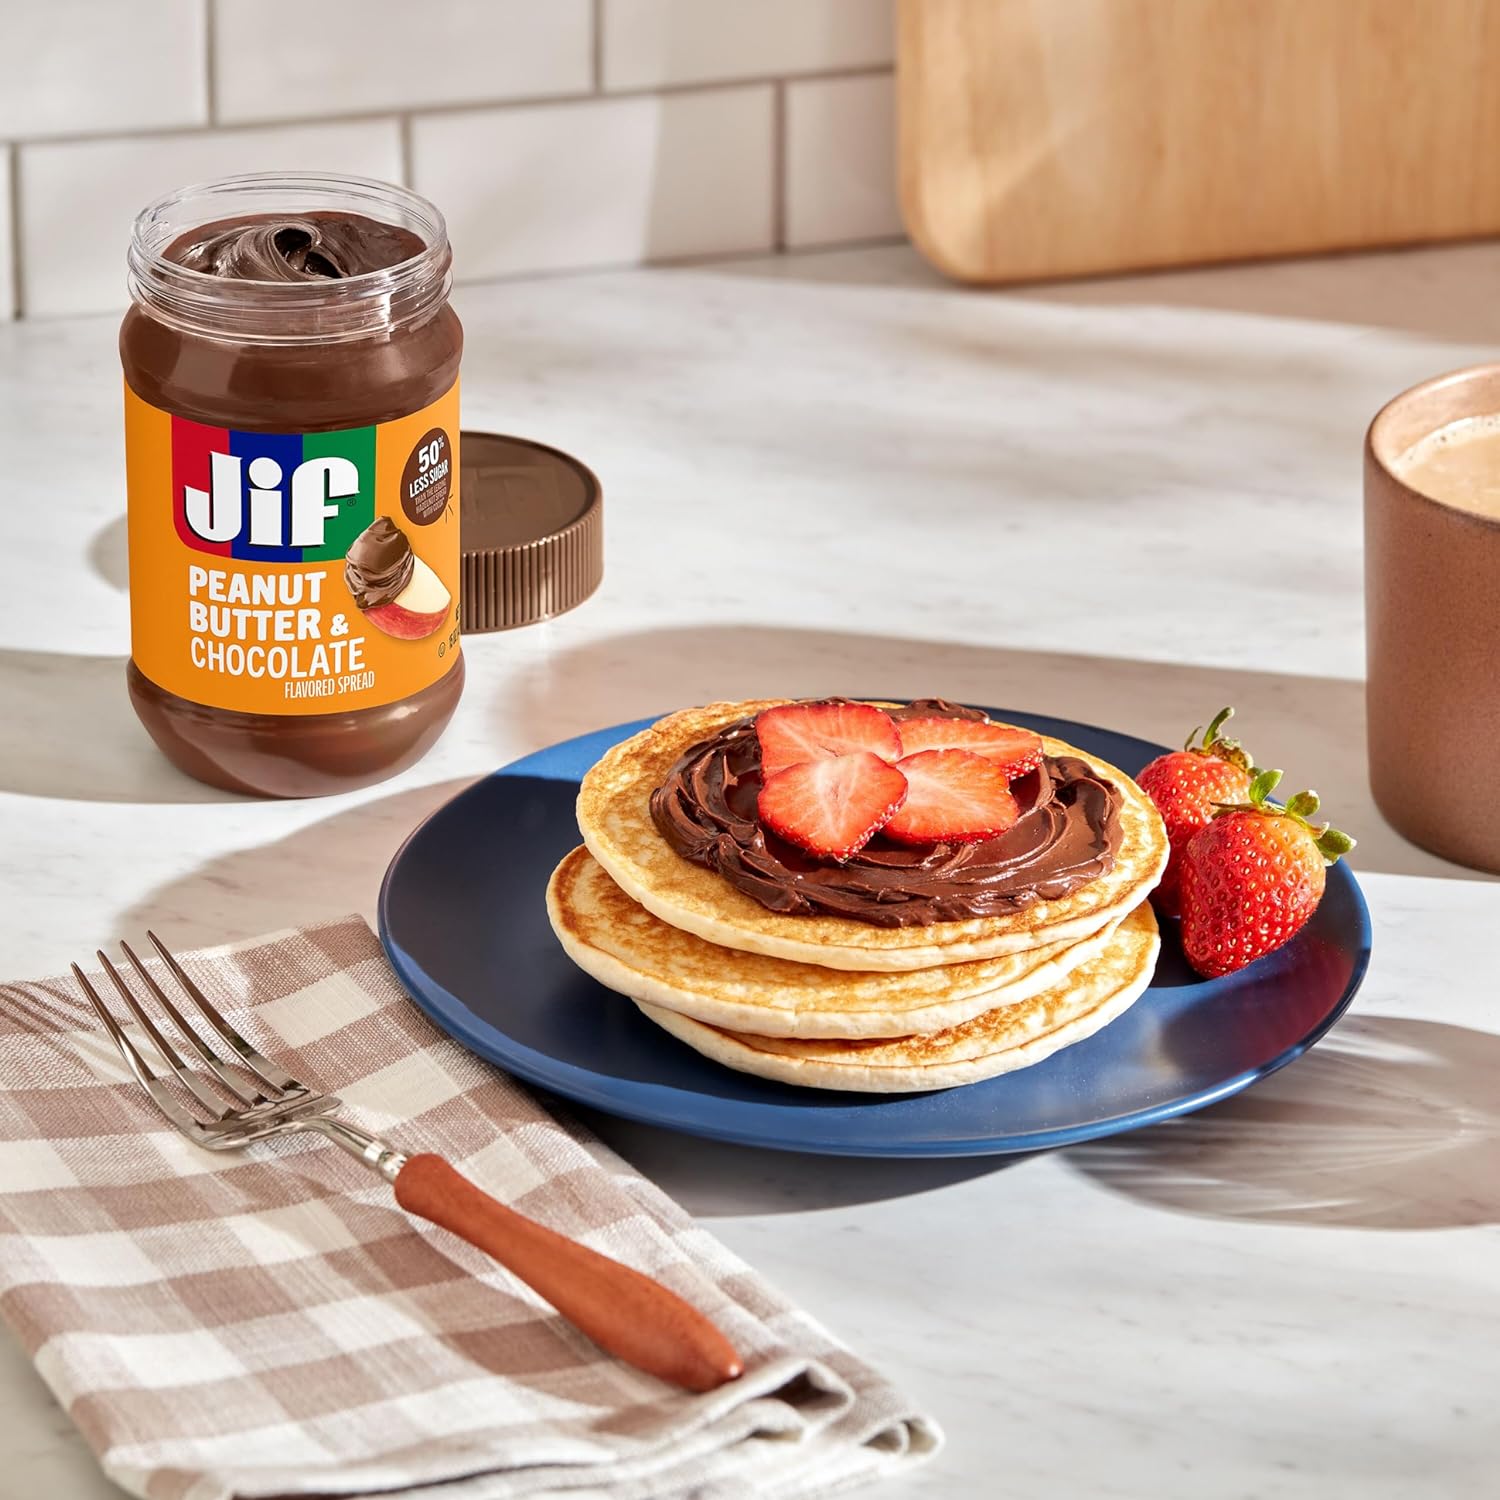 Jif Peanut Butter and Chocolate Flavored Spread for pancakes